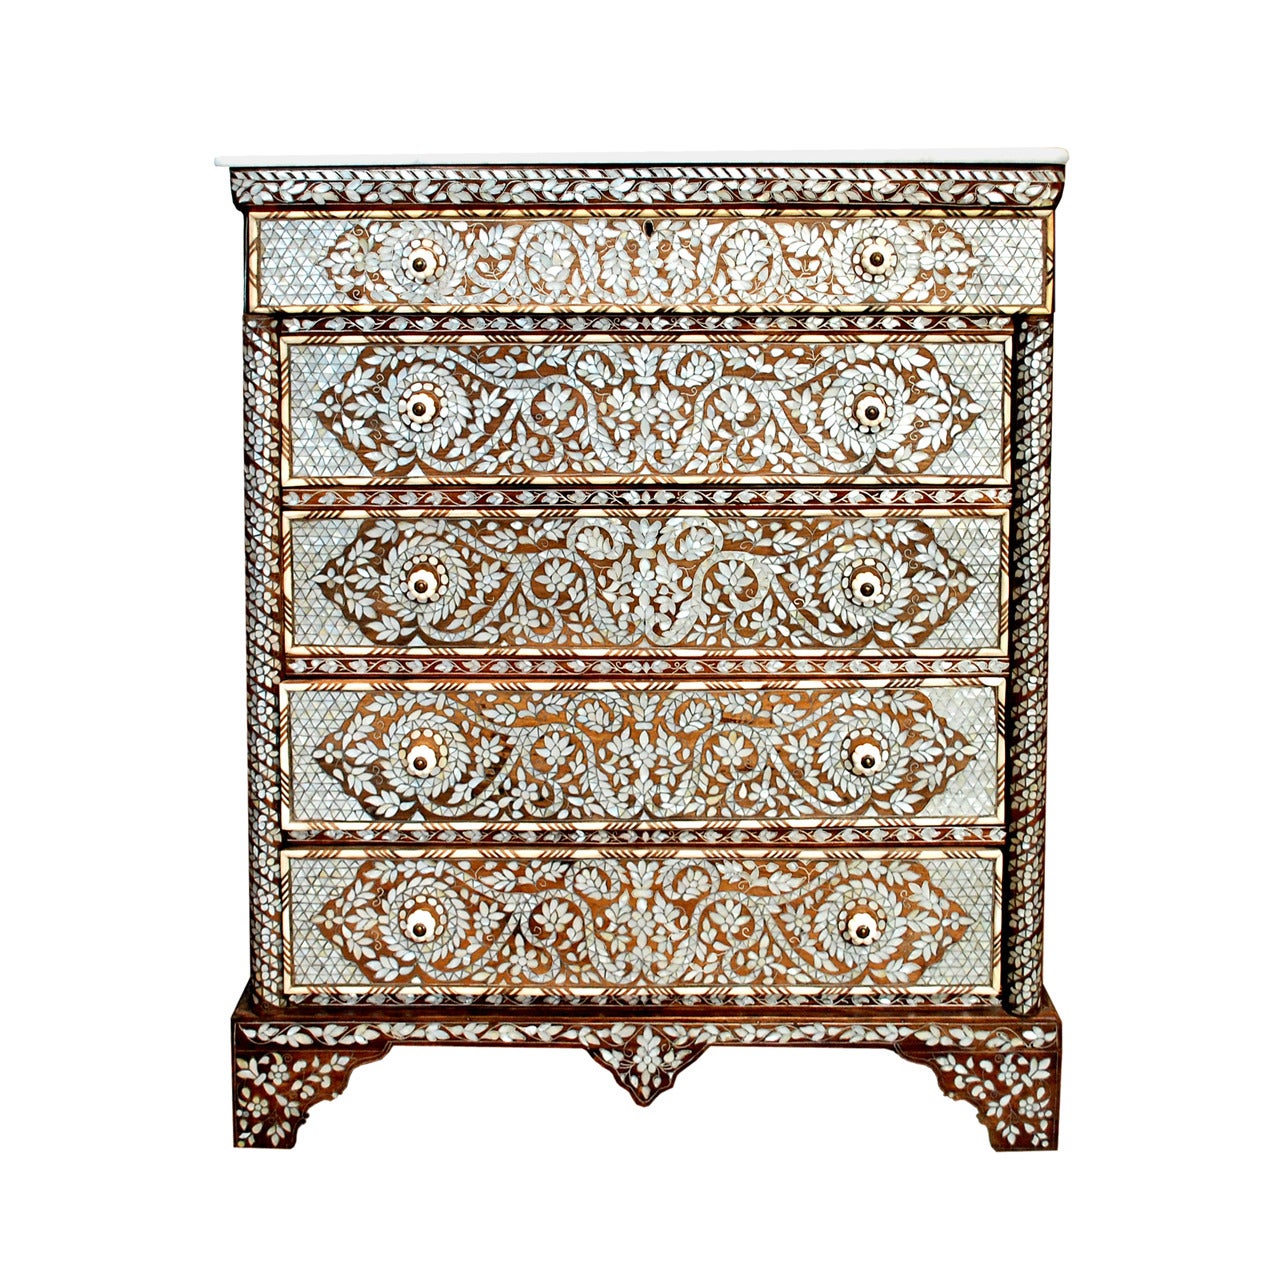 20th Century Syrian Mother-of-Pearl-Inlaid Chest of Drawers